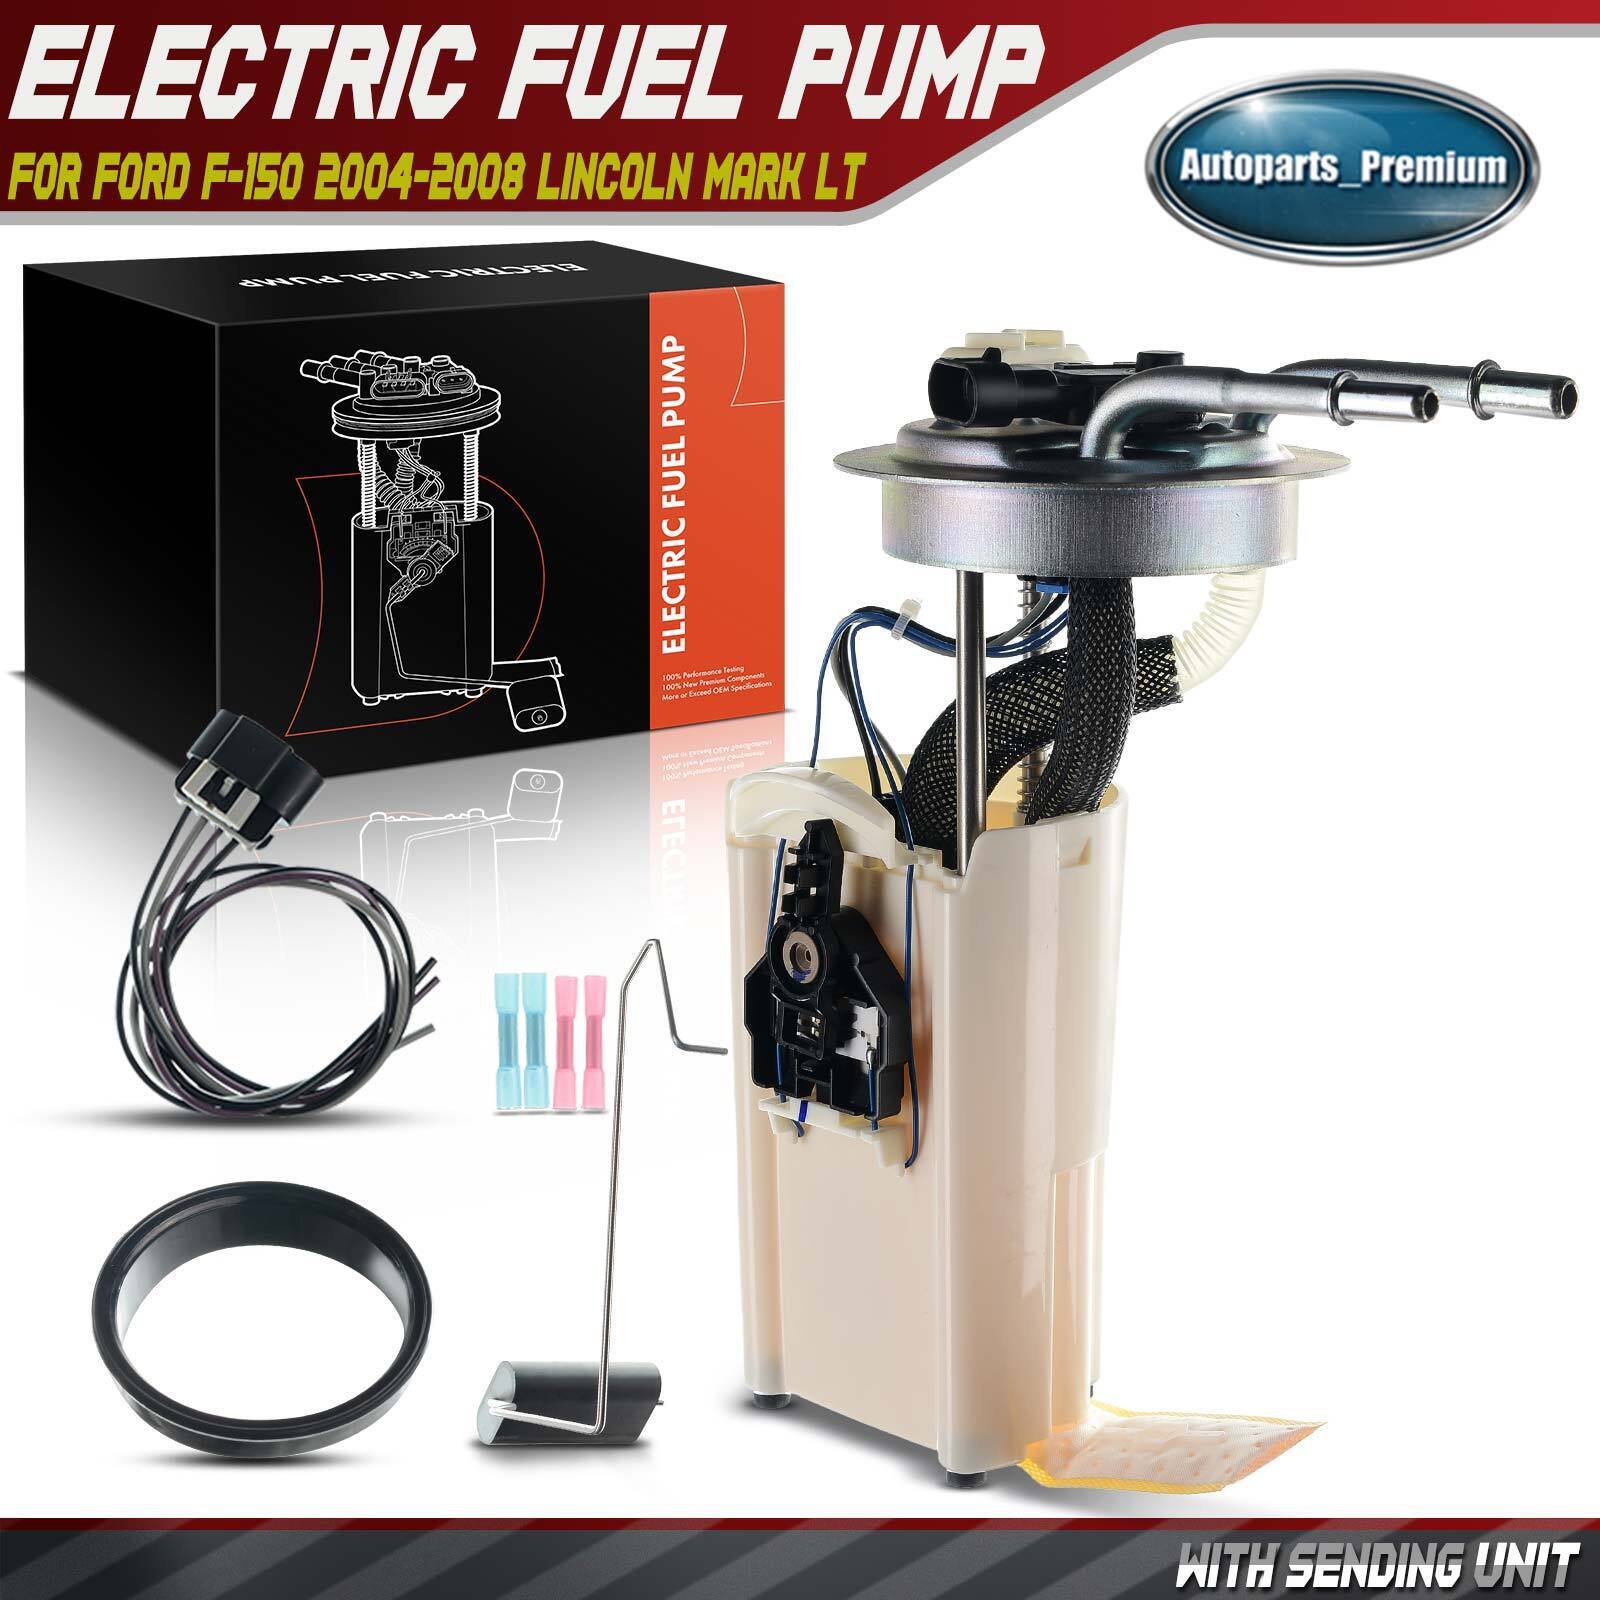 Fuel Pump Assembly with Sensor for Chevy Avalanche GMC Yukon XL Cadillac E3556M